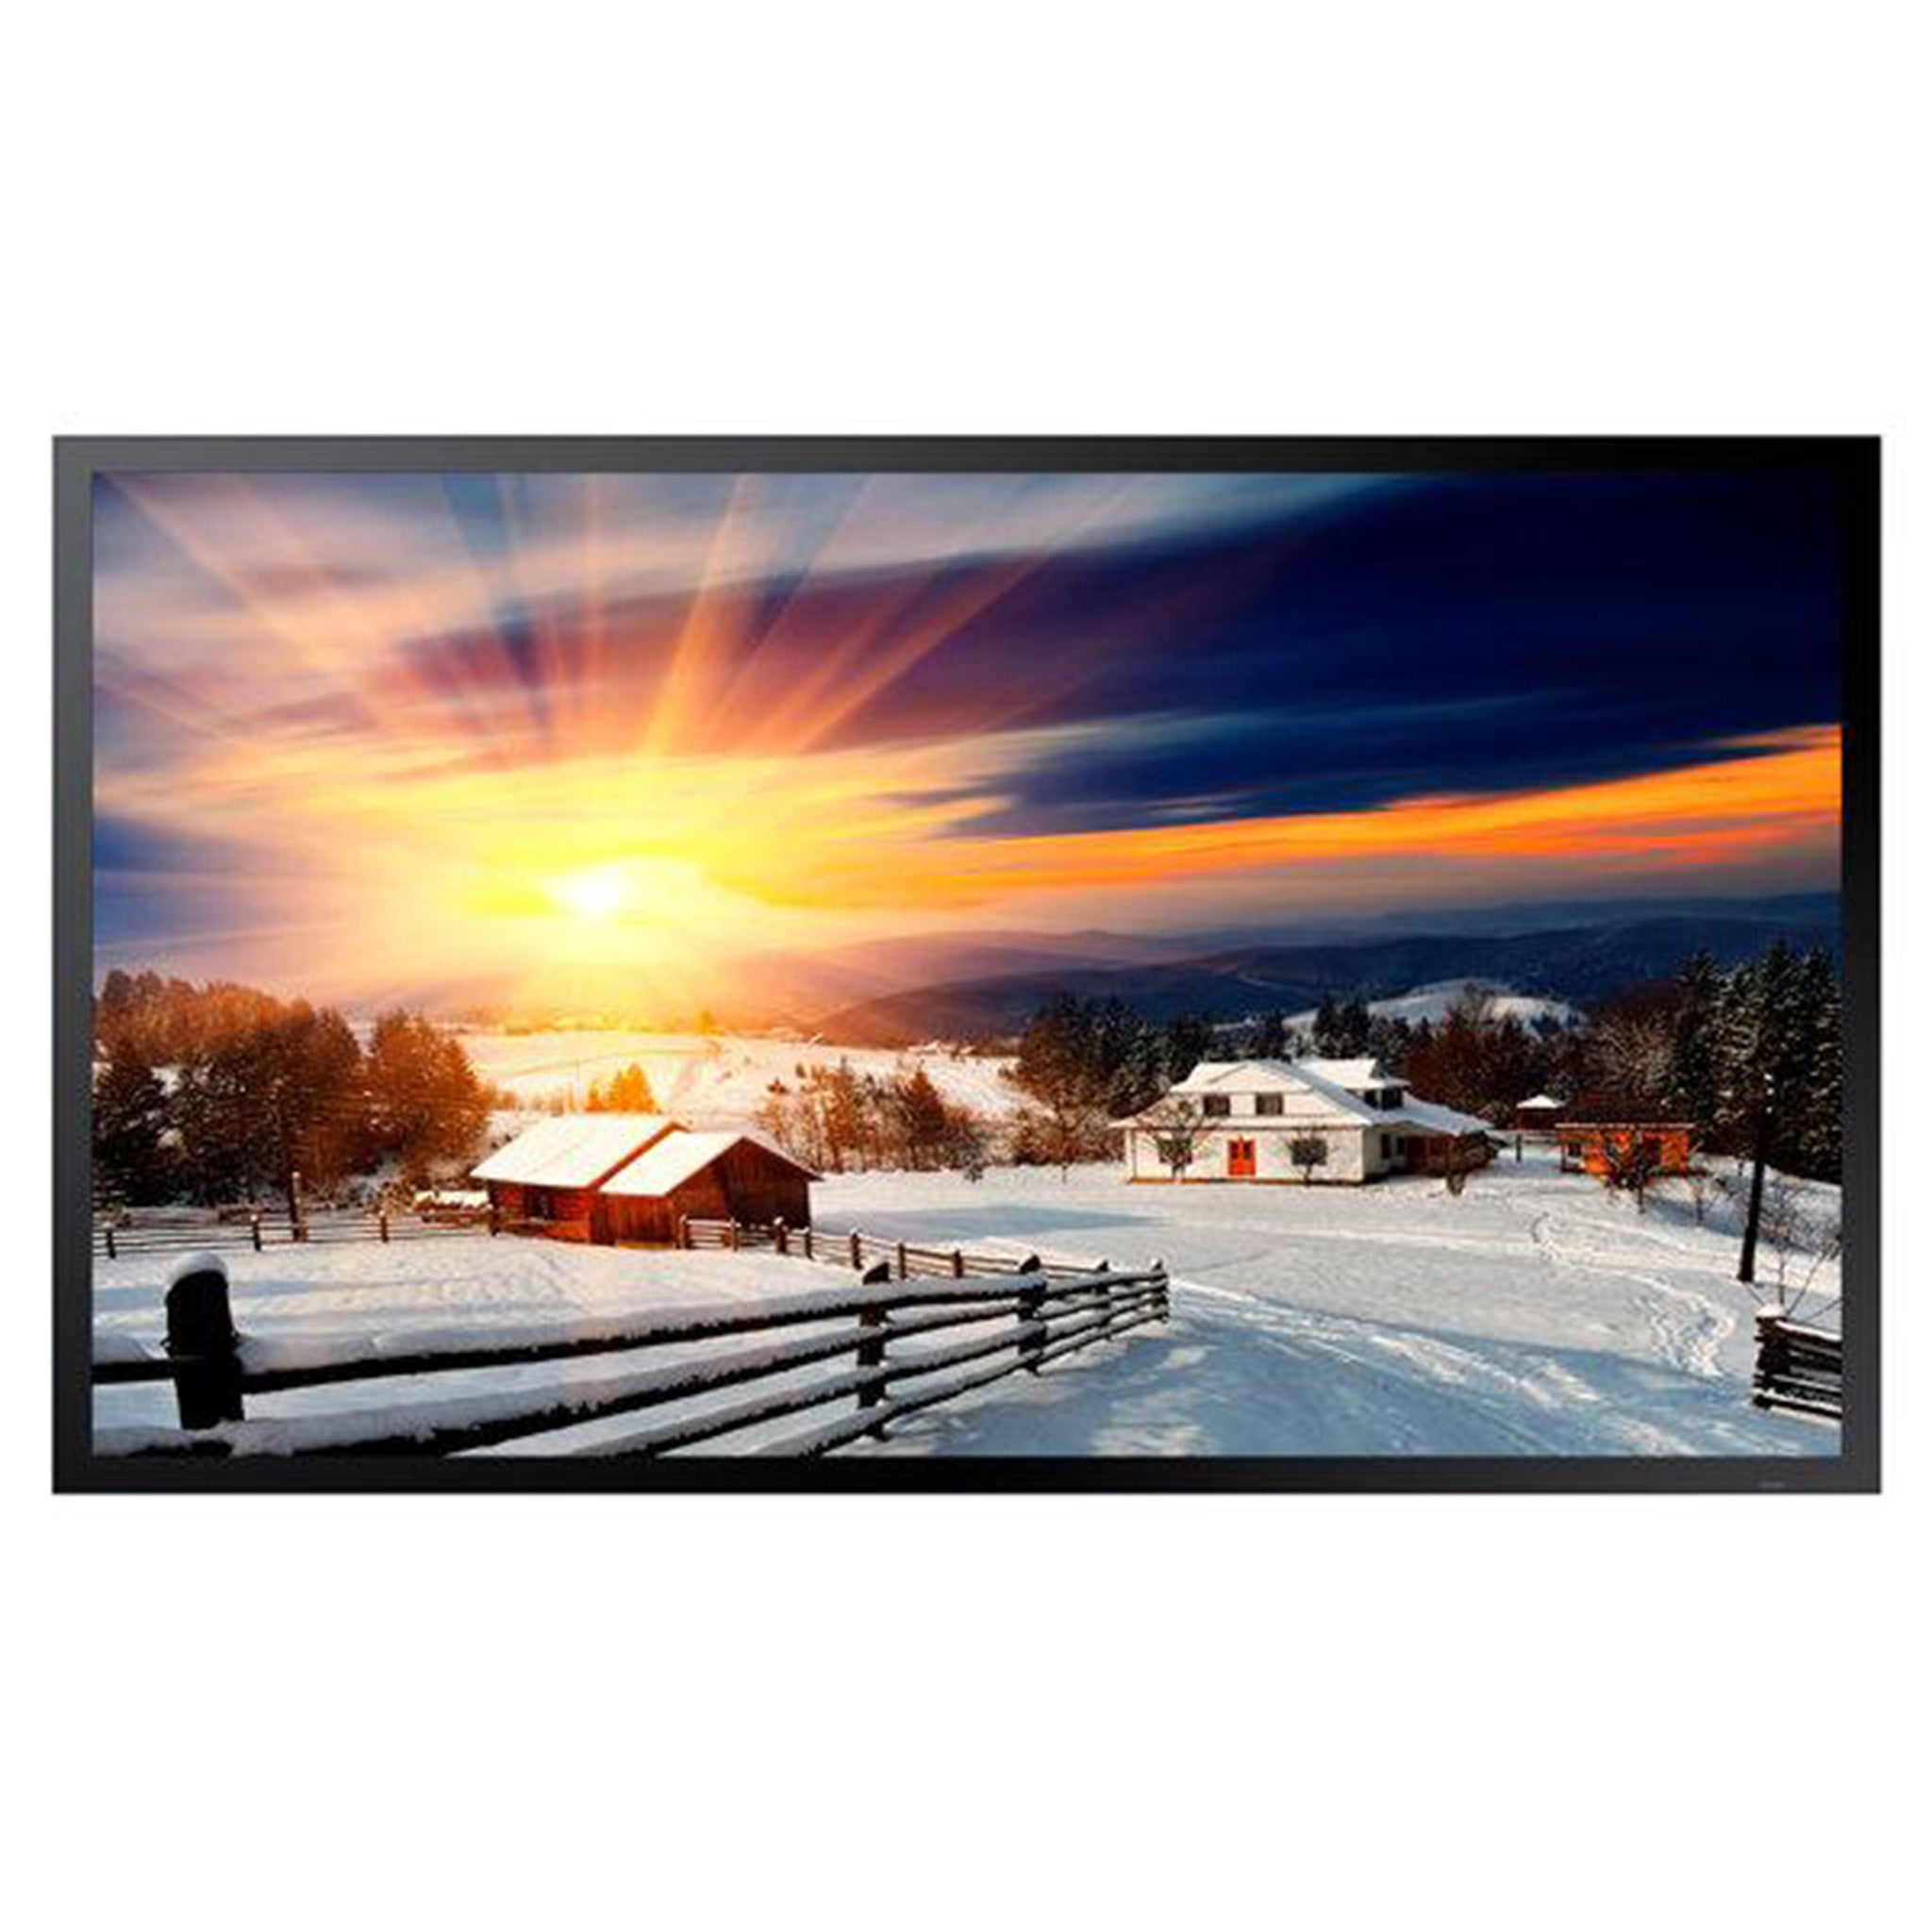 Samsung OH-F Series - High Brightness Signage Display for Outdoor Usage - 46" / 55" / 75" / 85"